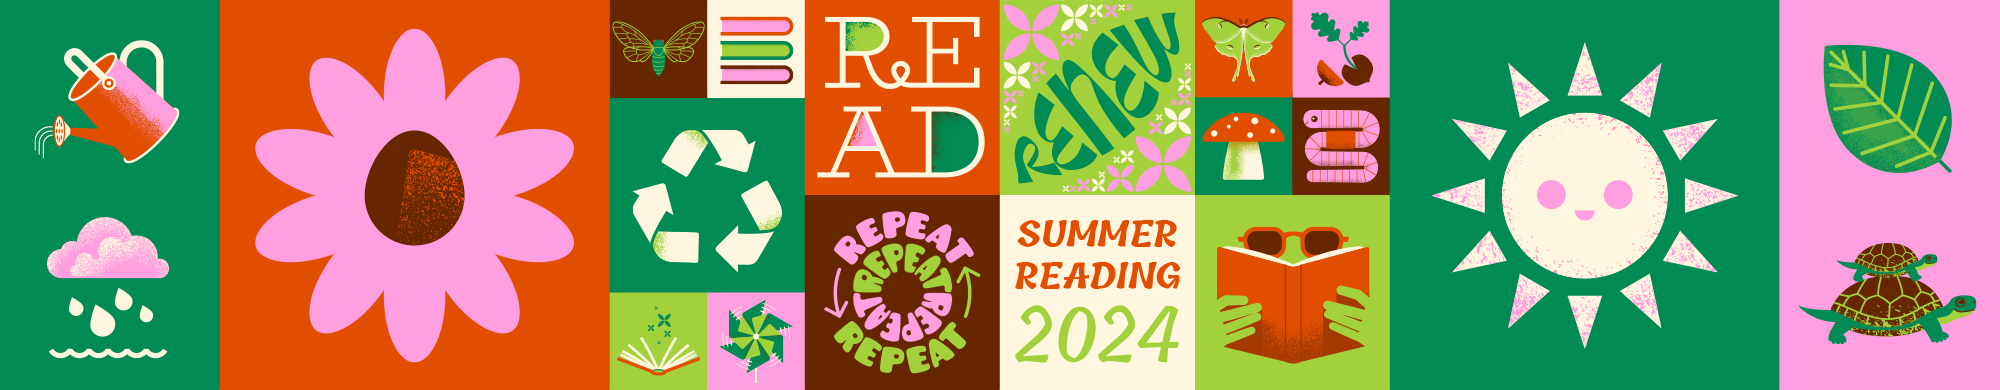 Retro reading and nature icons with text "Read, Renew, Repeat"